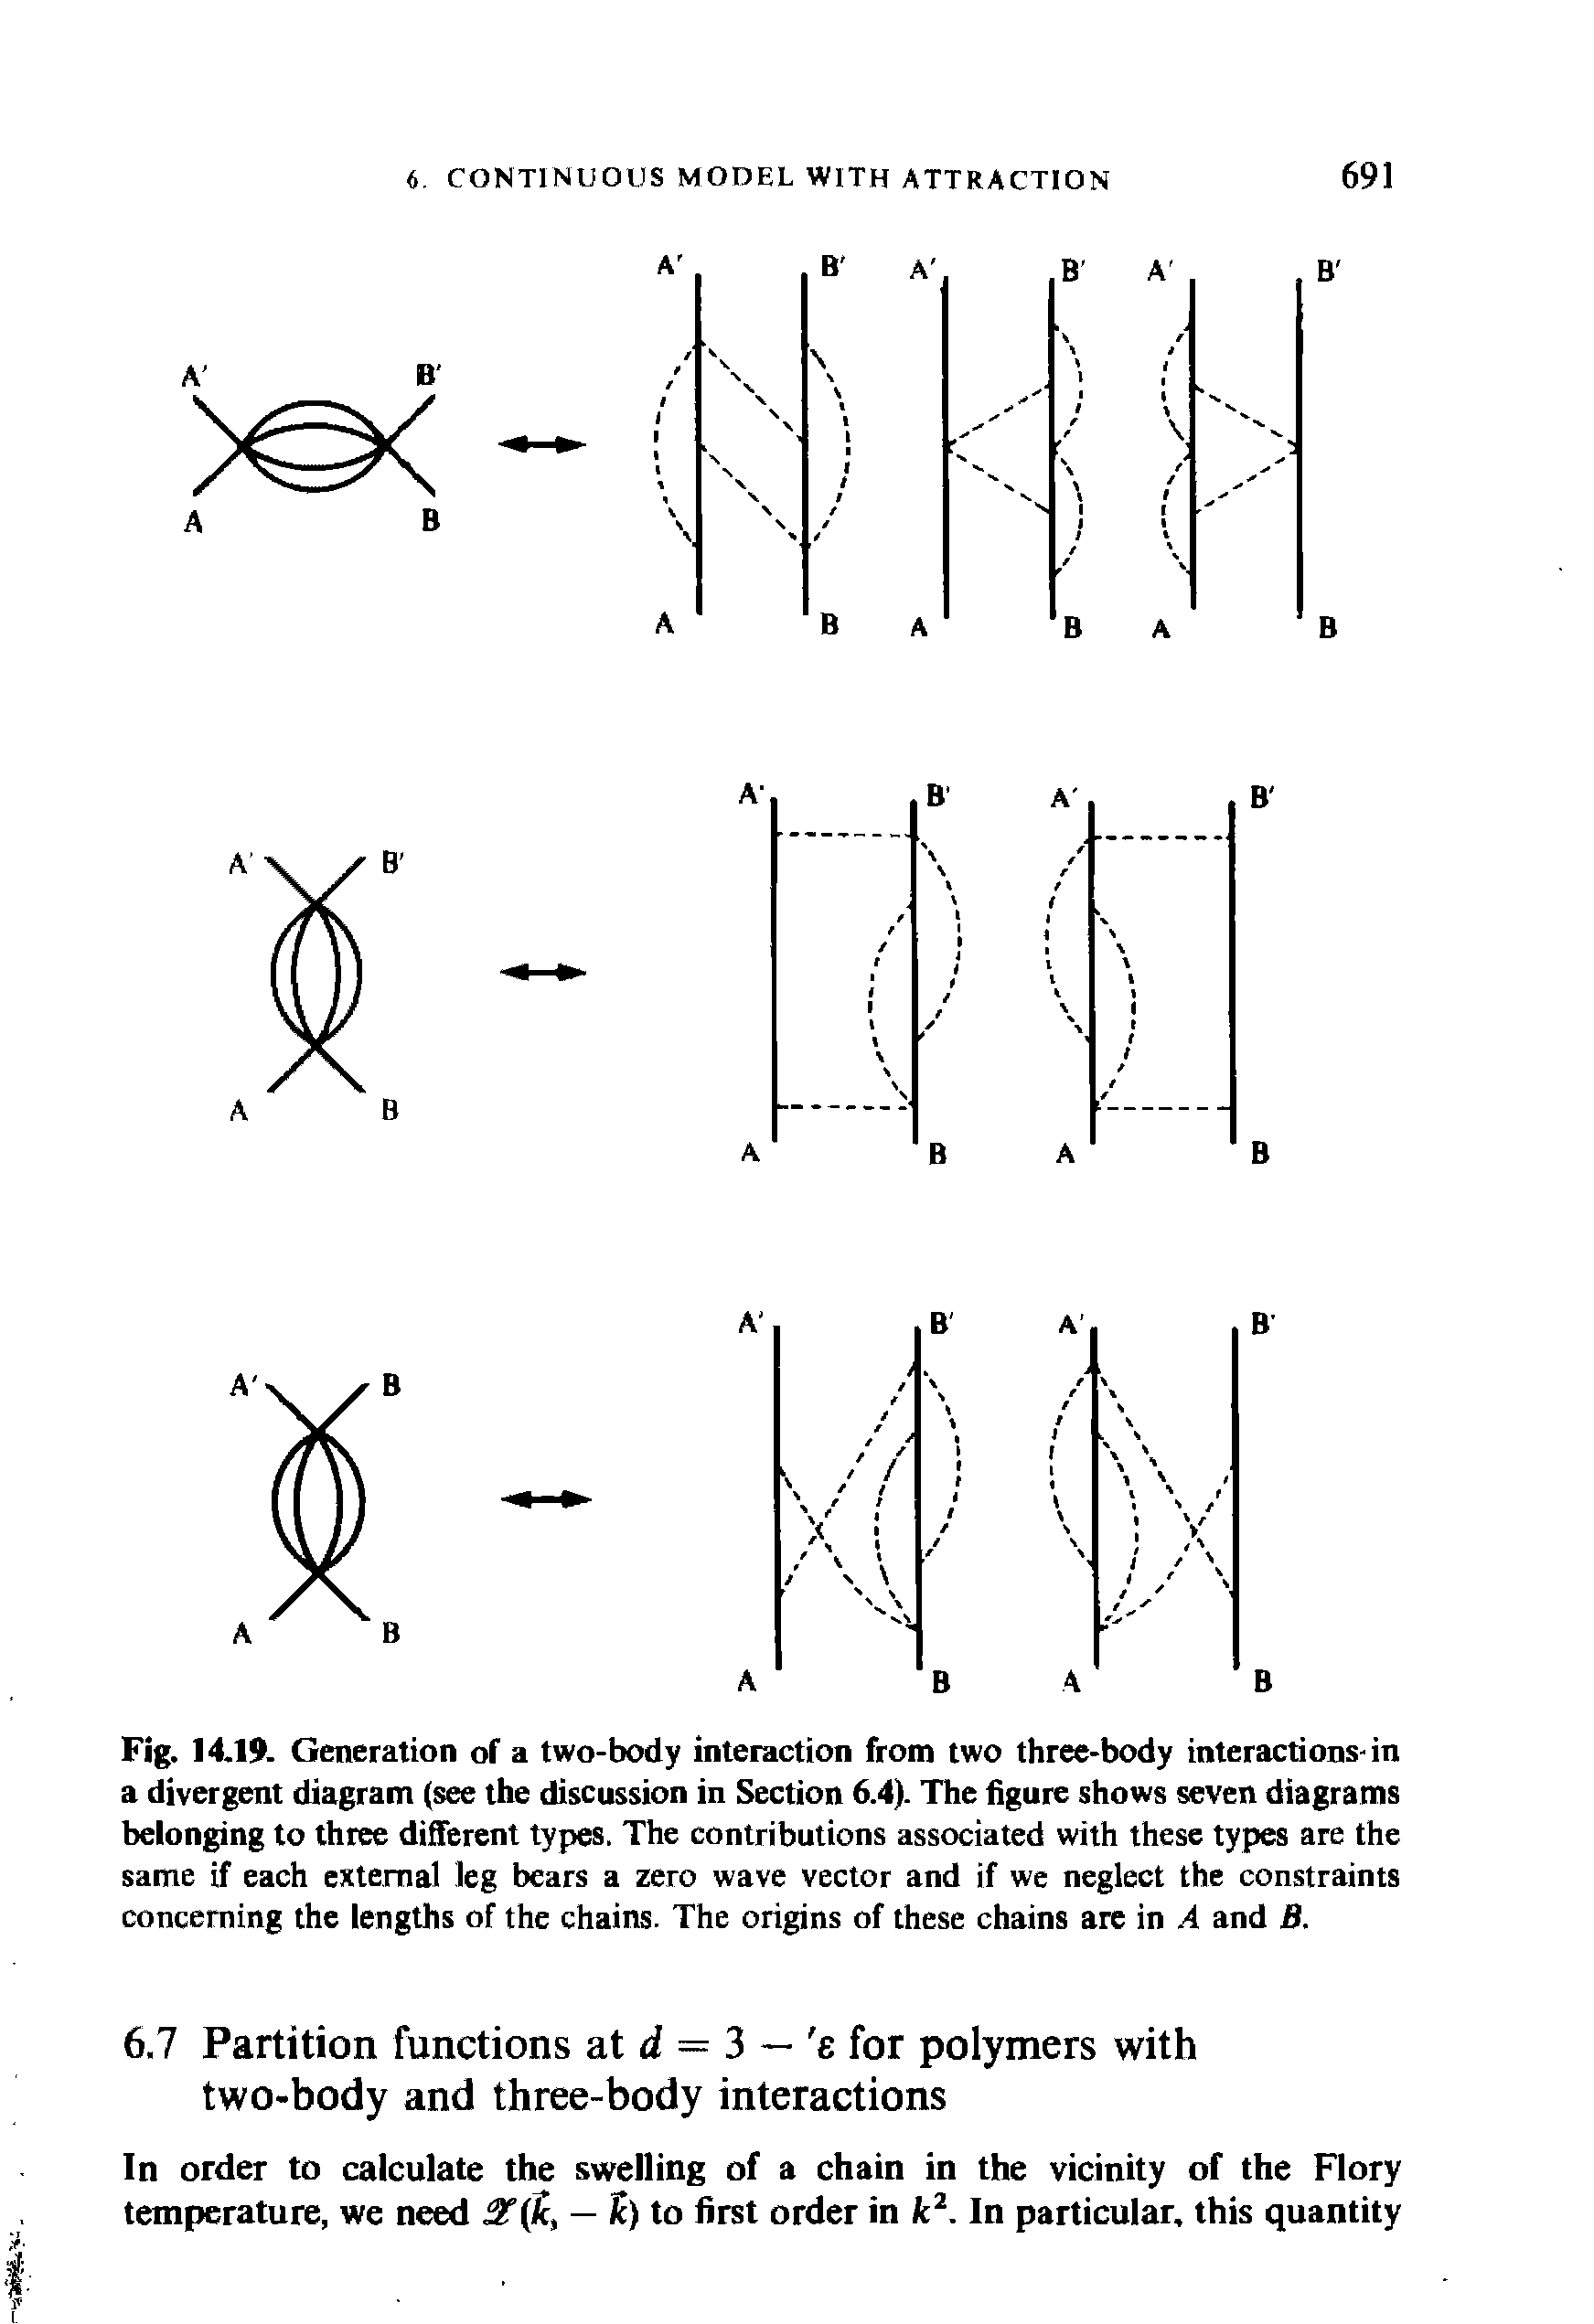 Fig. 14.19. Generation of a two-body interaction from two three-body interactions-in a divergent diagram (see the discussion in Section 6.4). The figure shows seven diagrams belonging to three different types. The contributions associated with these types are the same if each external leg bears a zero wave vector and if we neglect the constraints concerning the lengths of the chains. The origins of these chains are in A and B.